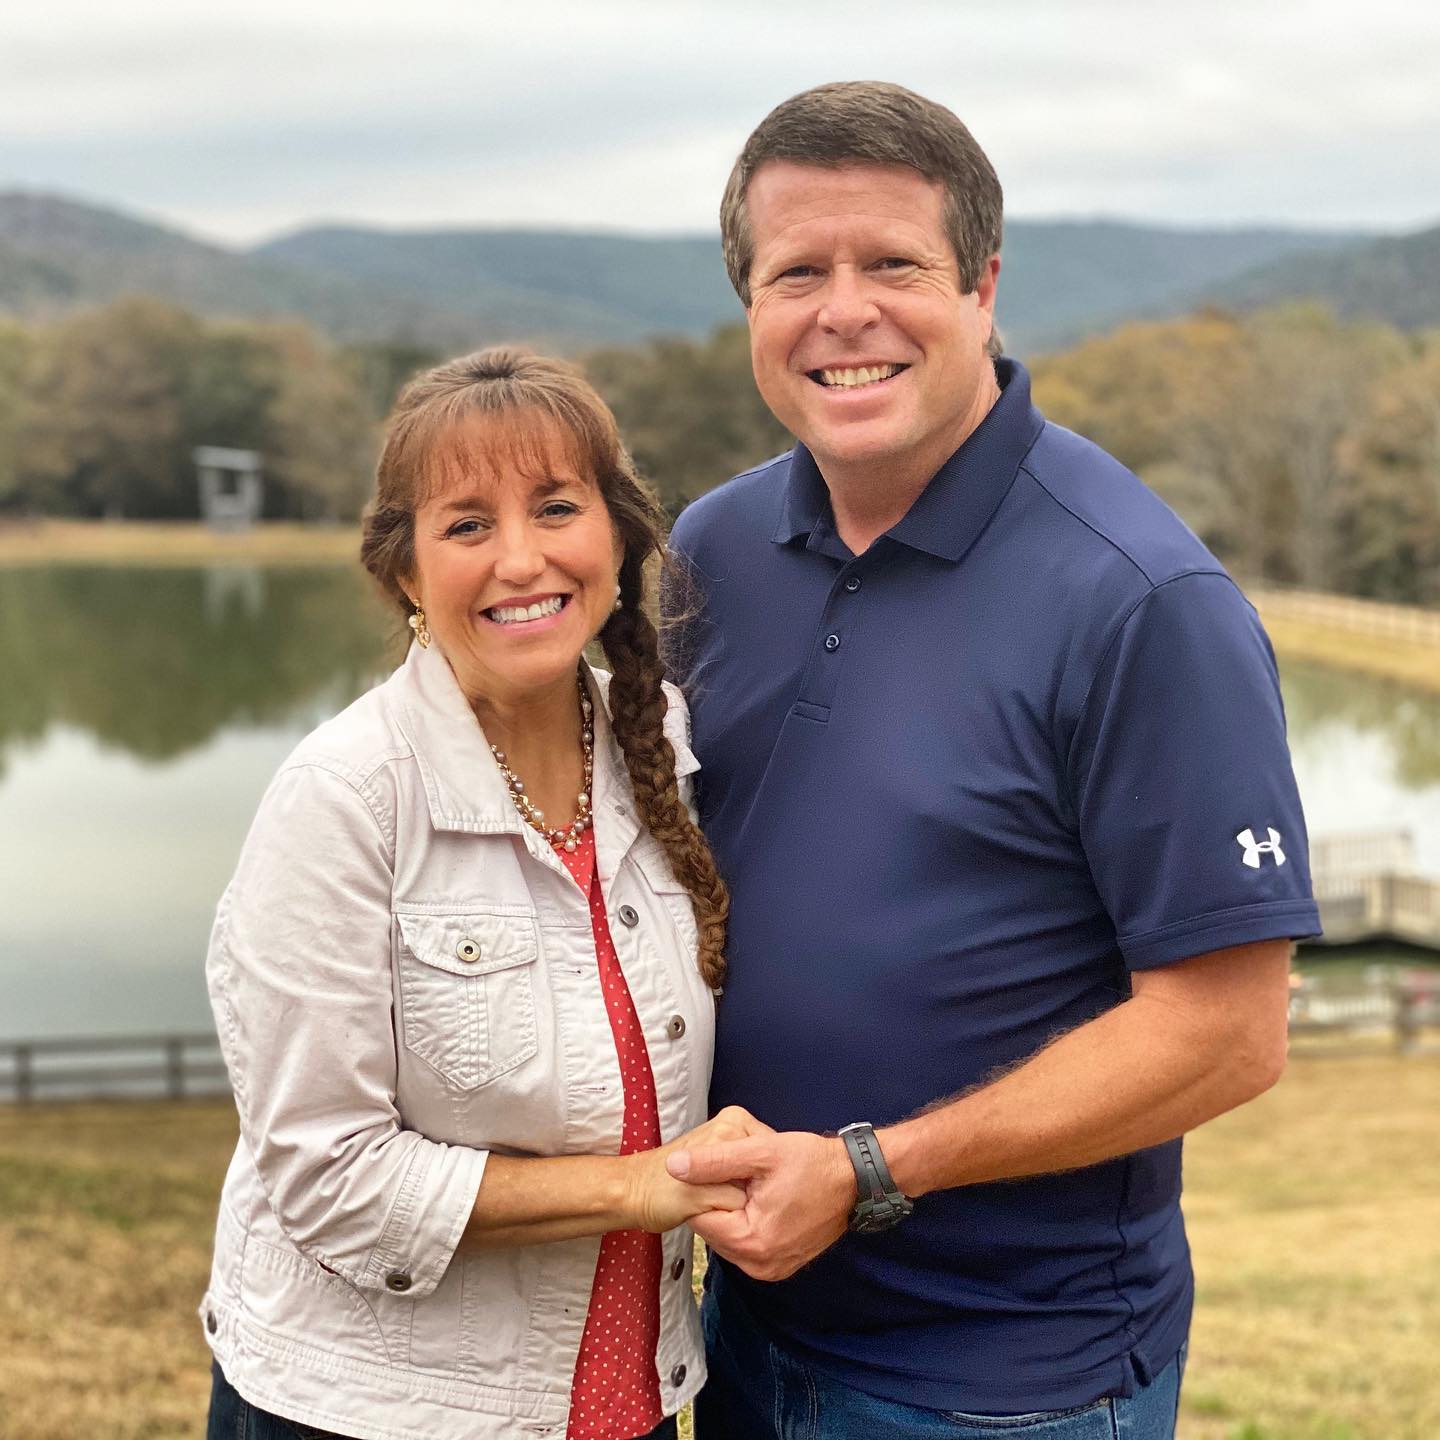 Jinger's parents, Michelle Duggar (left) and Job Bob Duggar (right) have banned pants in their family and believe women should dress modestly